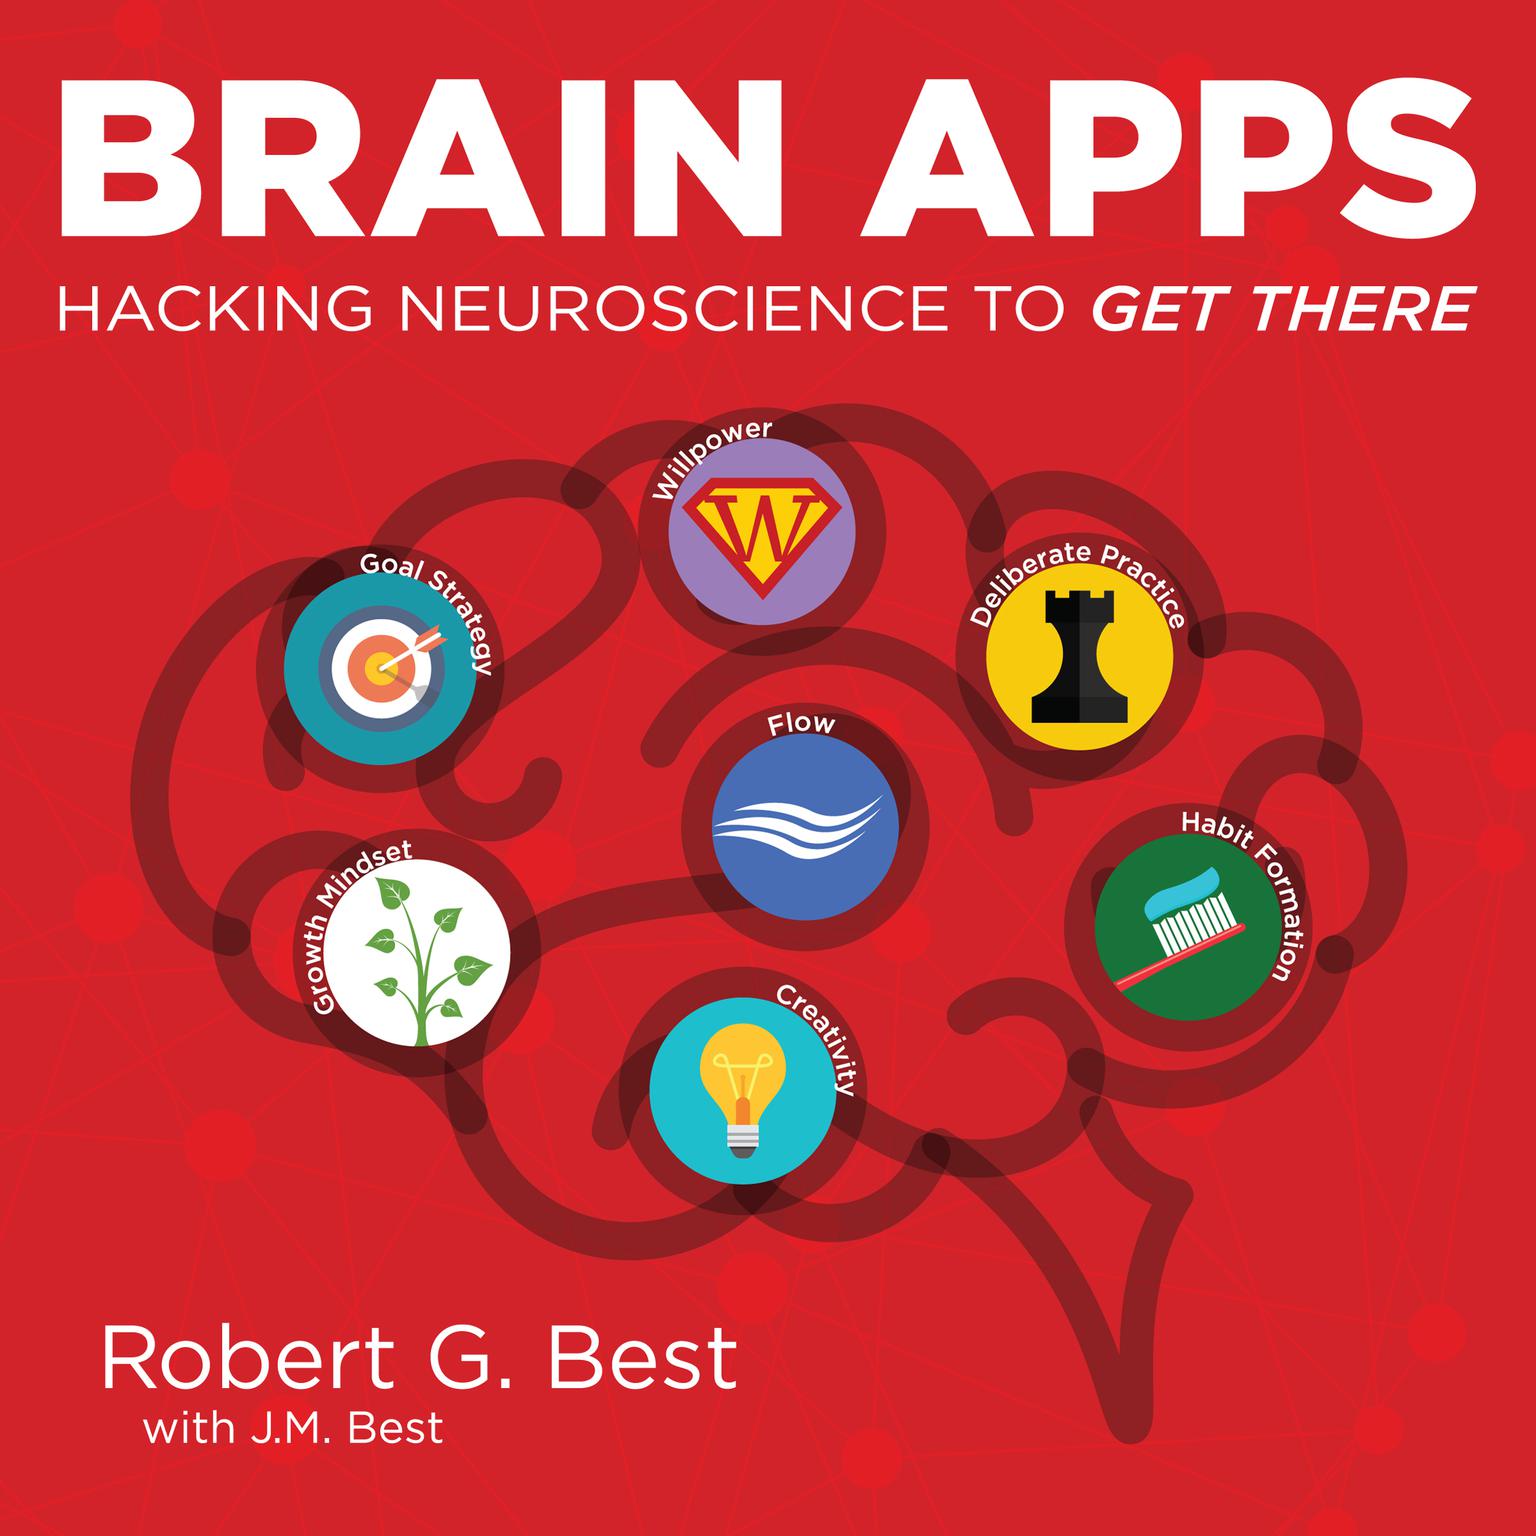 Brain Apps: Hacking Neuroscience To Get There Audiobook, by Robert G. Best